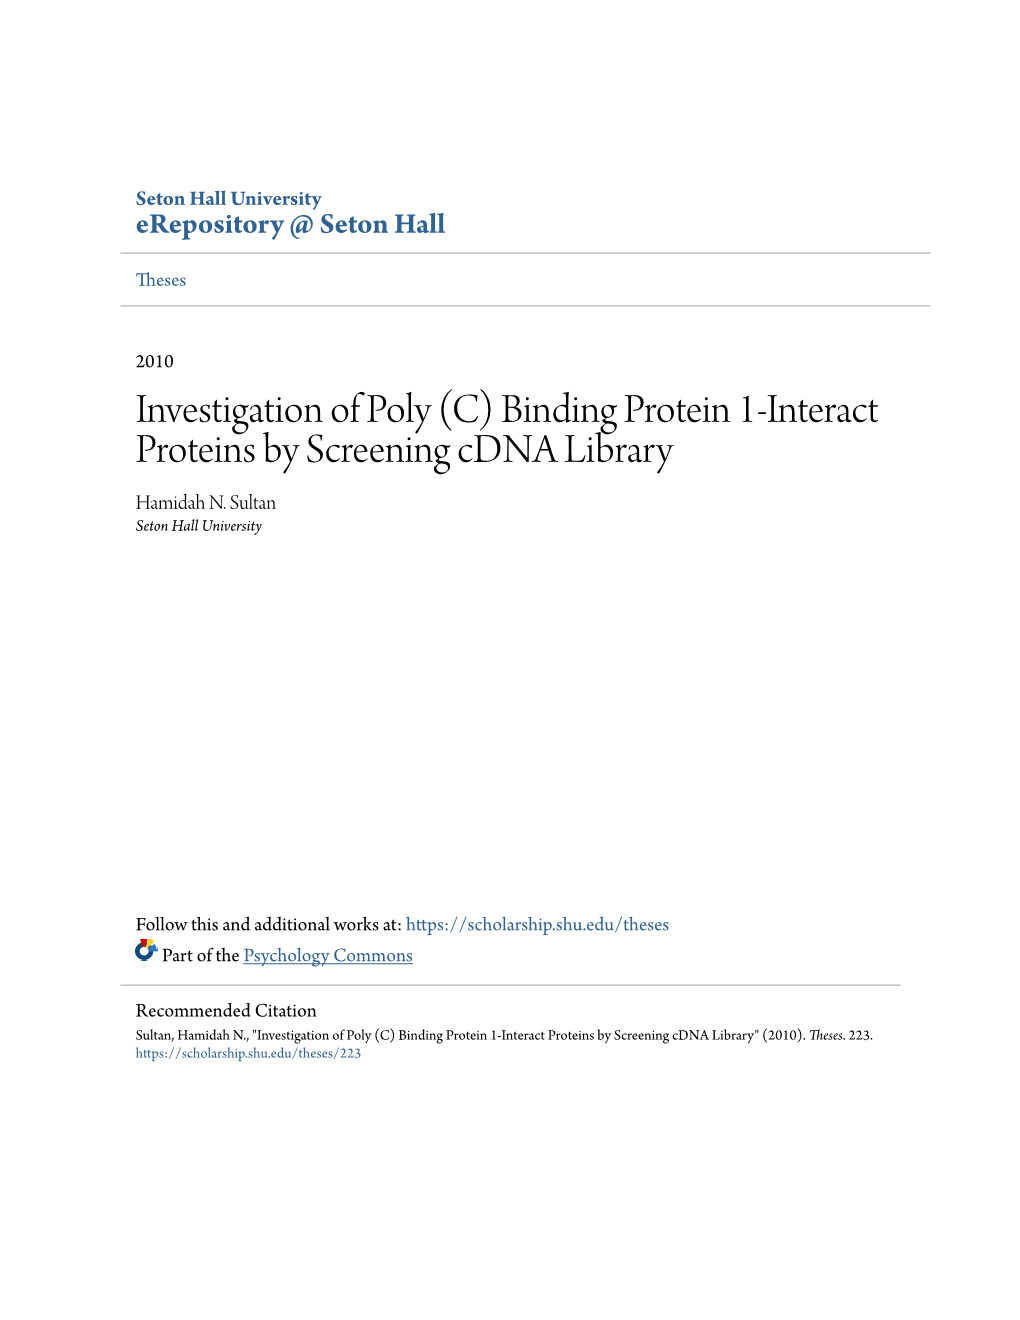 Investigation of Poly (C) Binding Protein 1-Interact Proteins by Screening Cdna Library Hamidah N